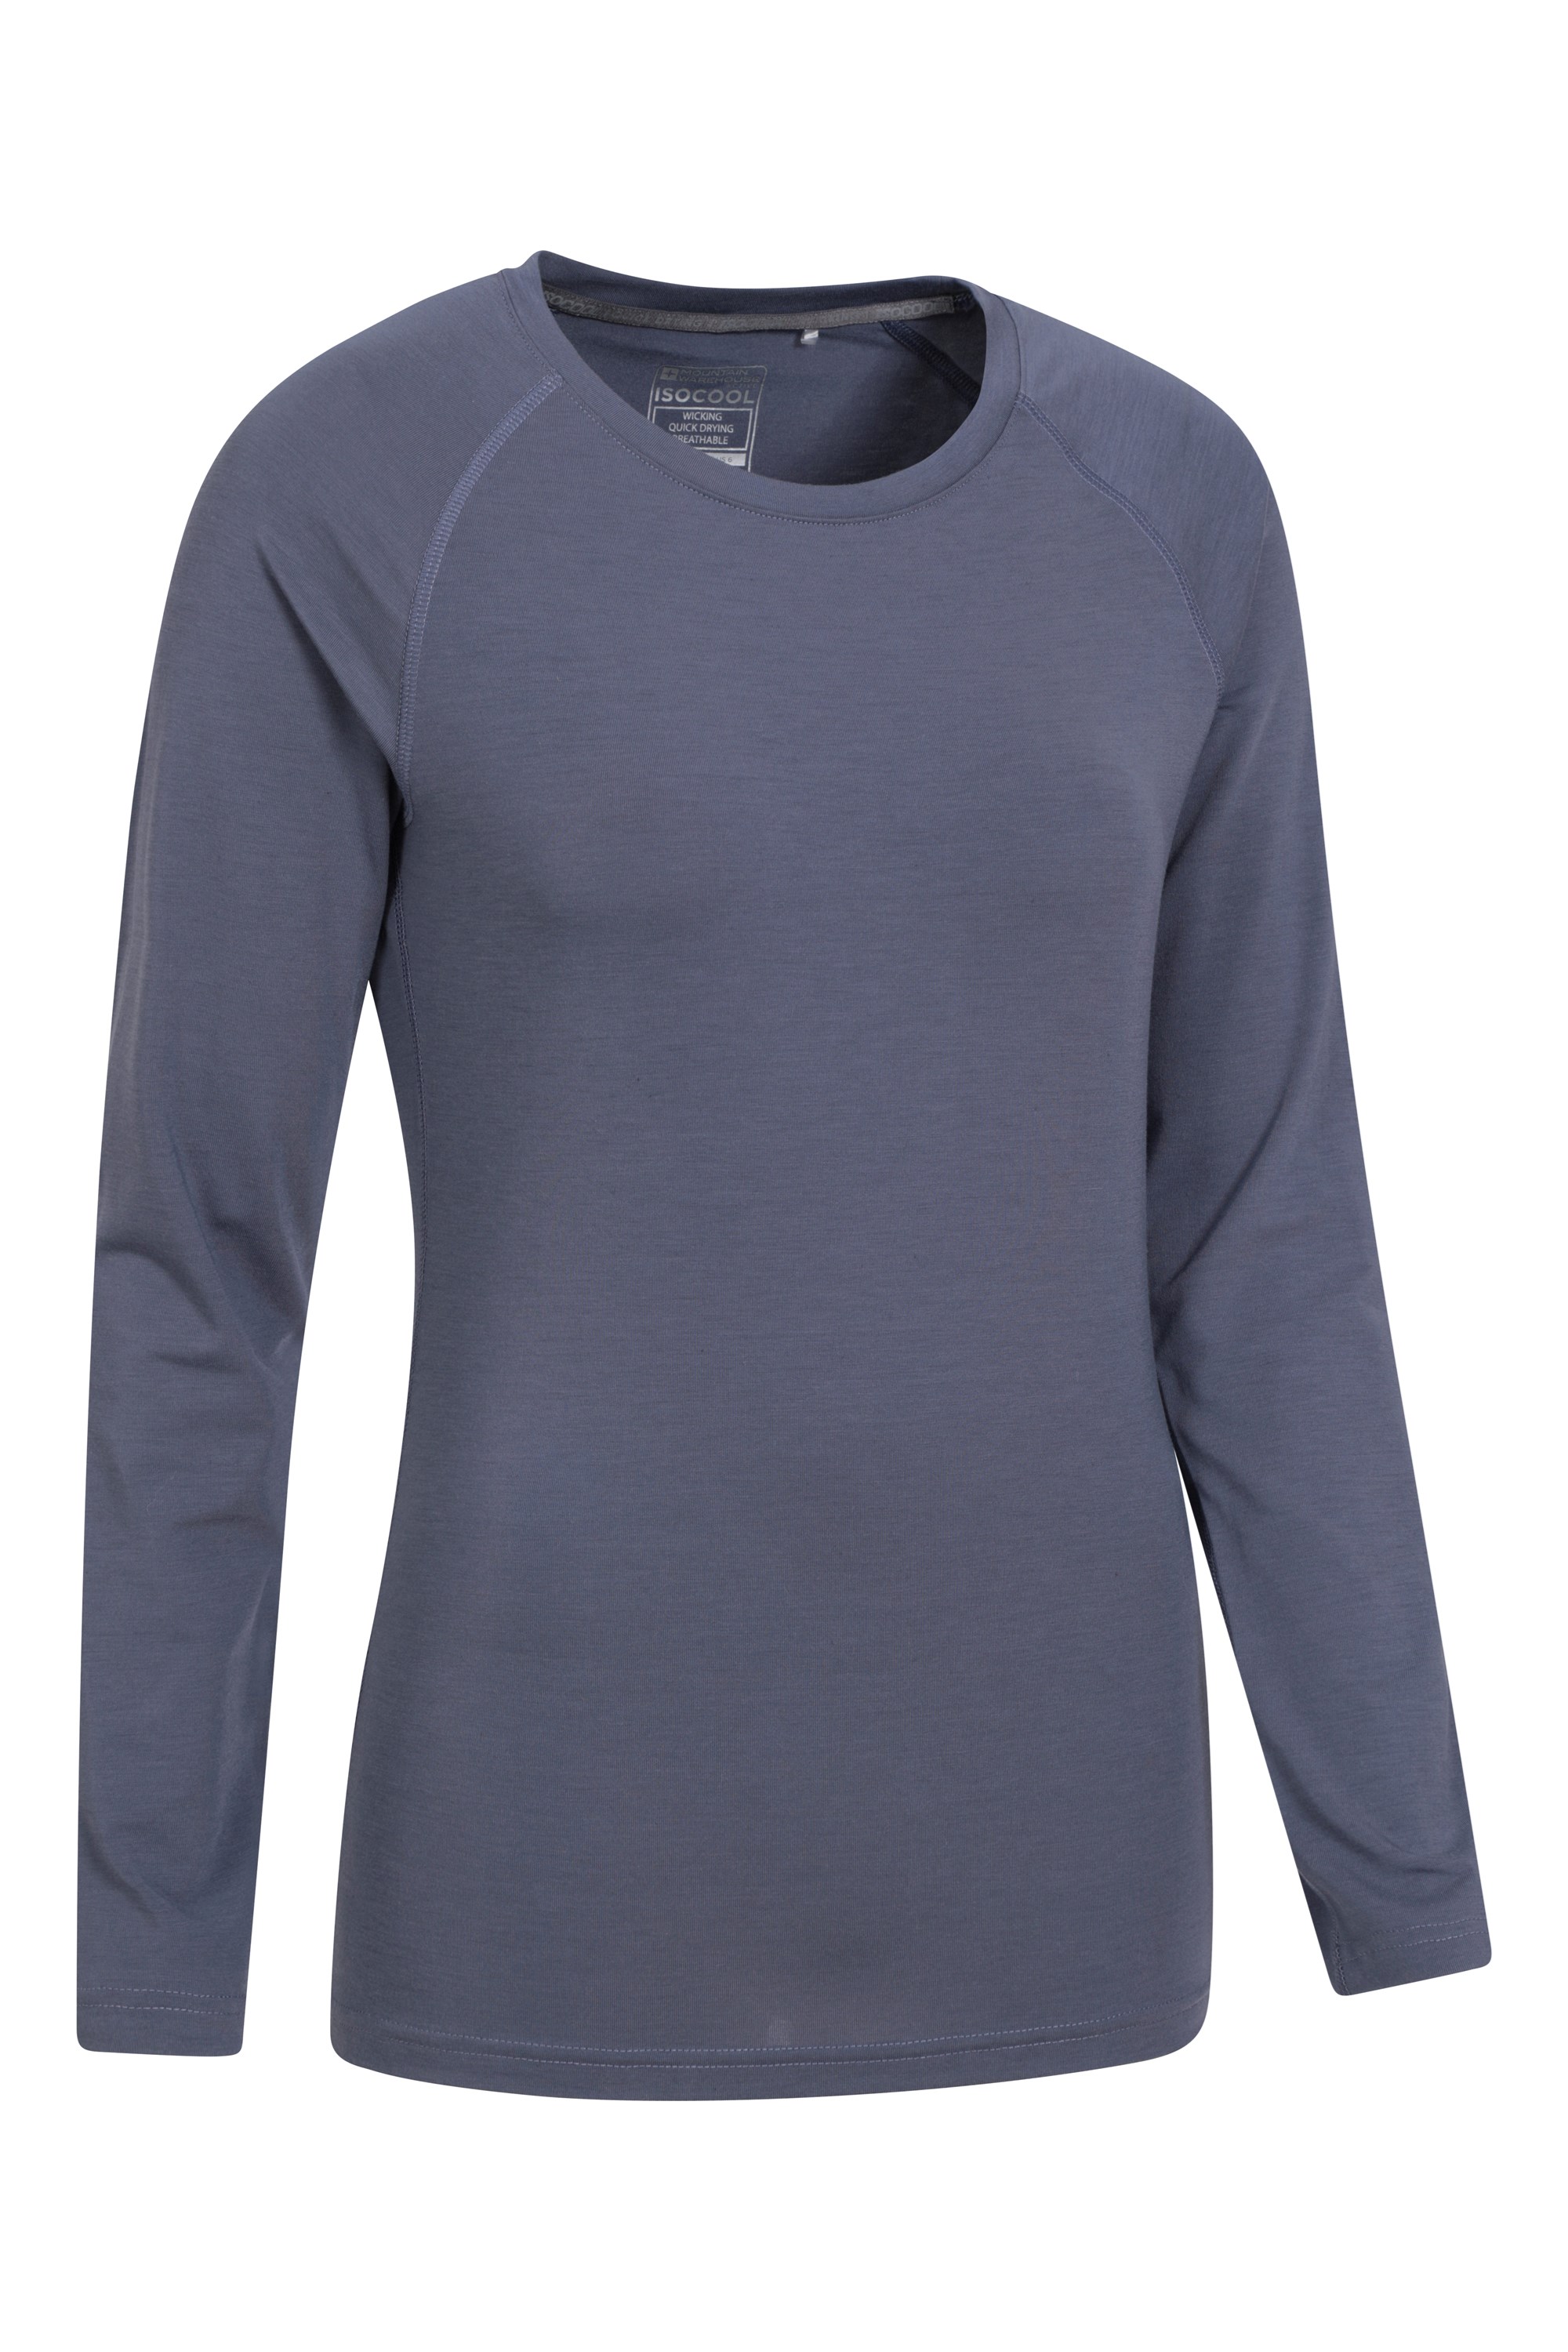 Quick Dry Womens Long Sleeve Top | Mountain Warehouse CA